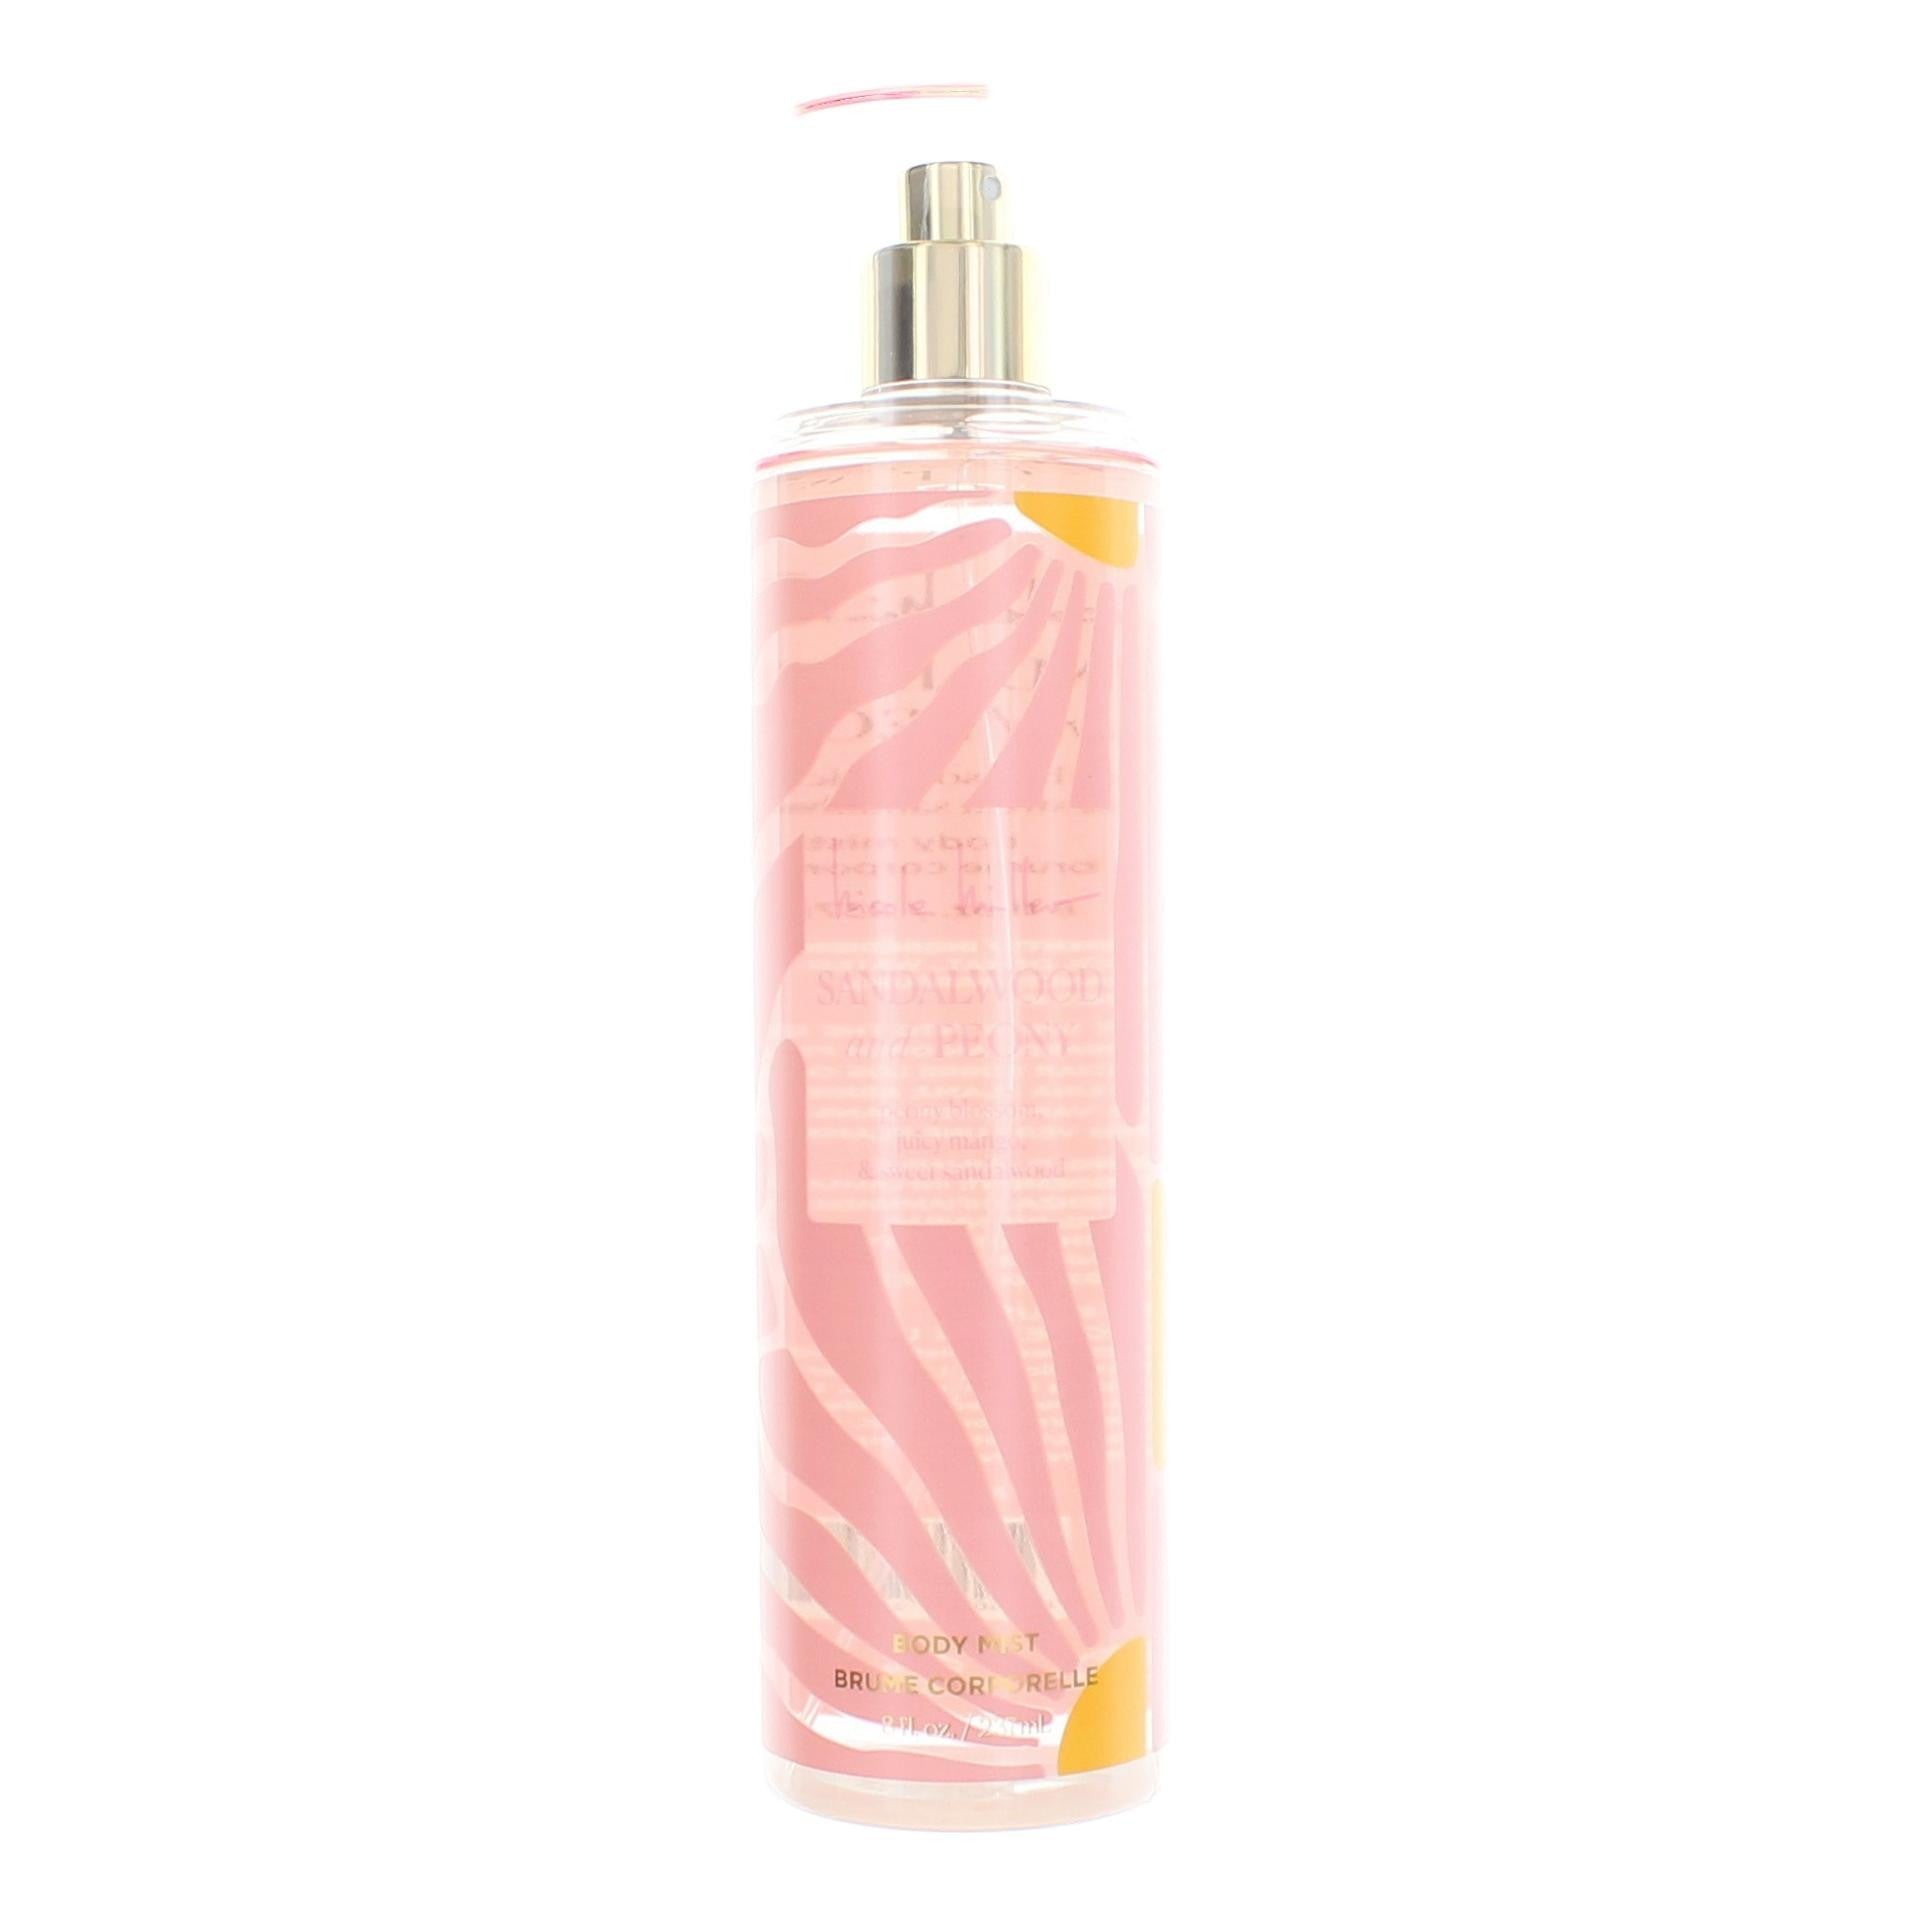 Sandalwood and Peony by Nicole Miller, 8 oz Body Mist for Women